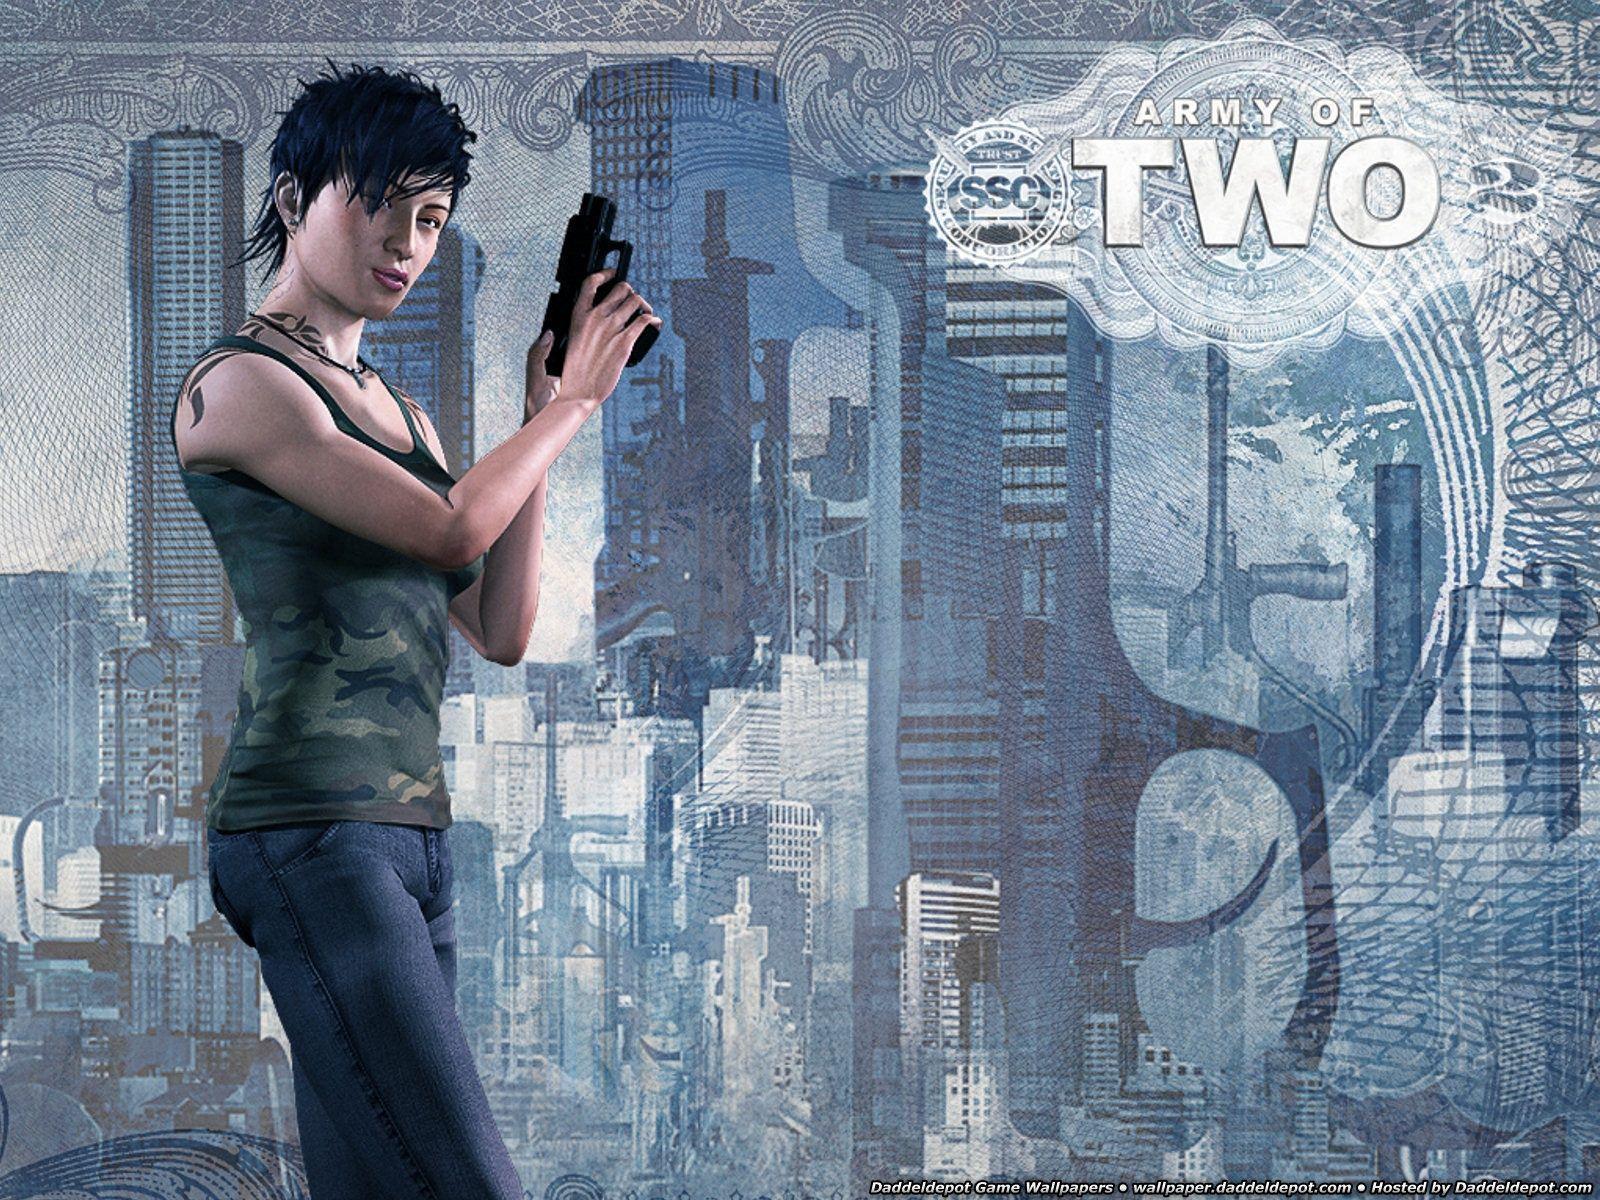 Army of Two wallpaper. Army of Two